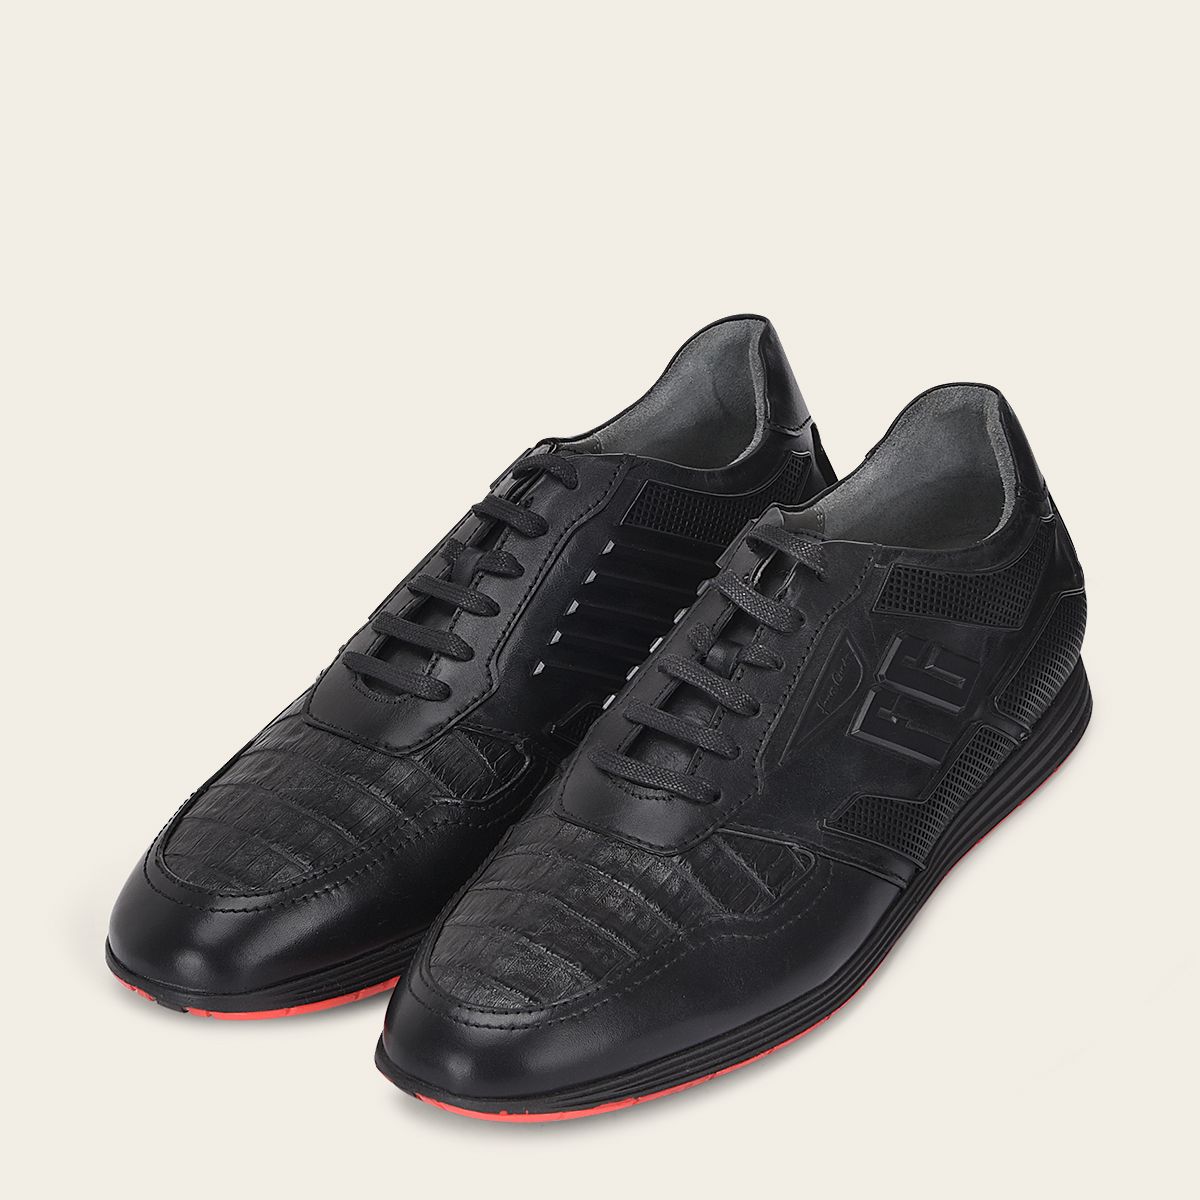 82KCWST - Cuadra black casual fashion caiman leather sneakers for men